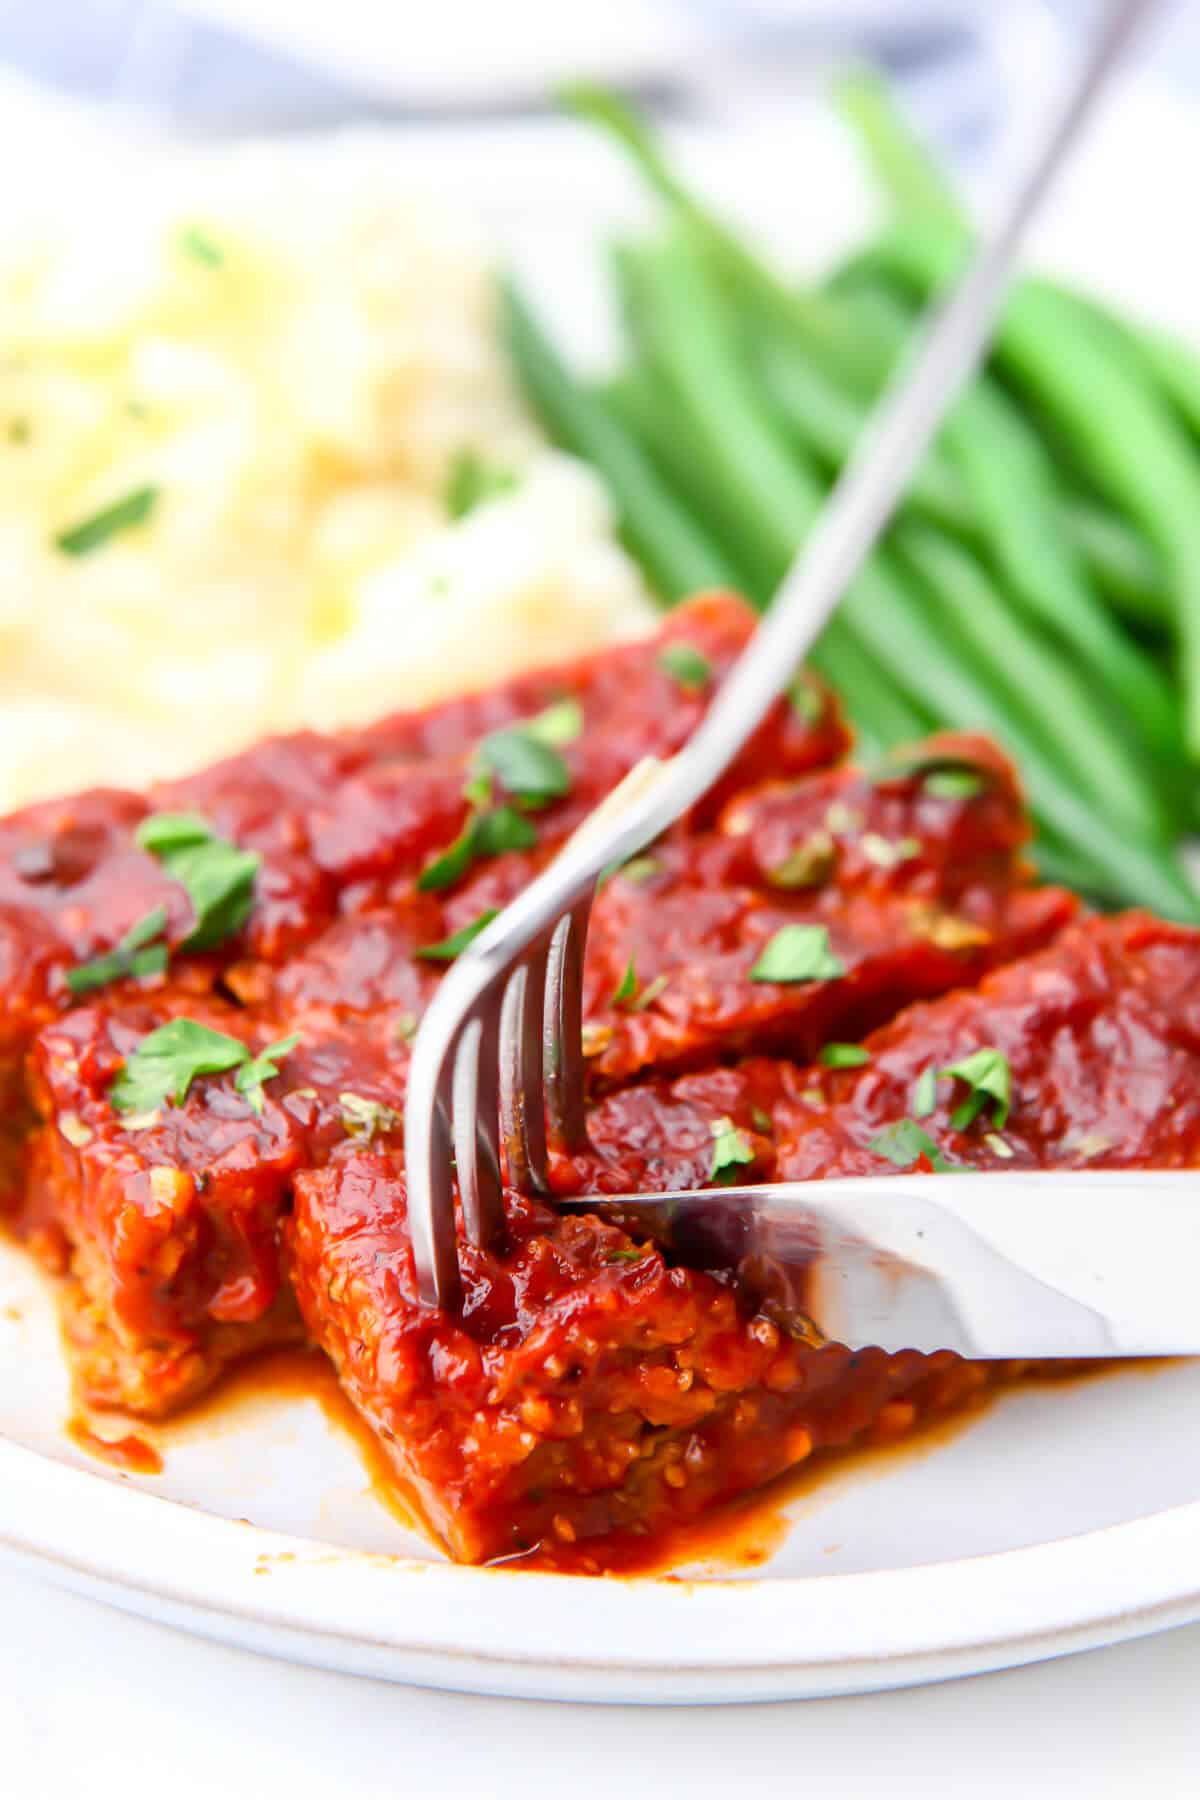 Vegan ribs being cut on a plate with mashed potatoes and green beans.